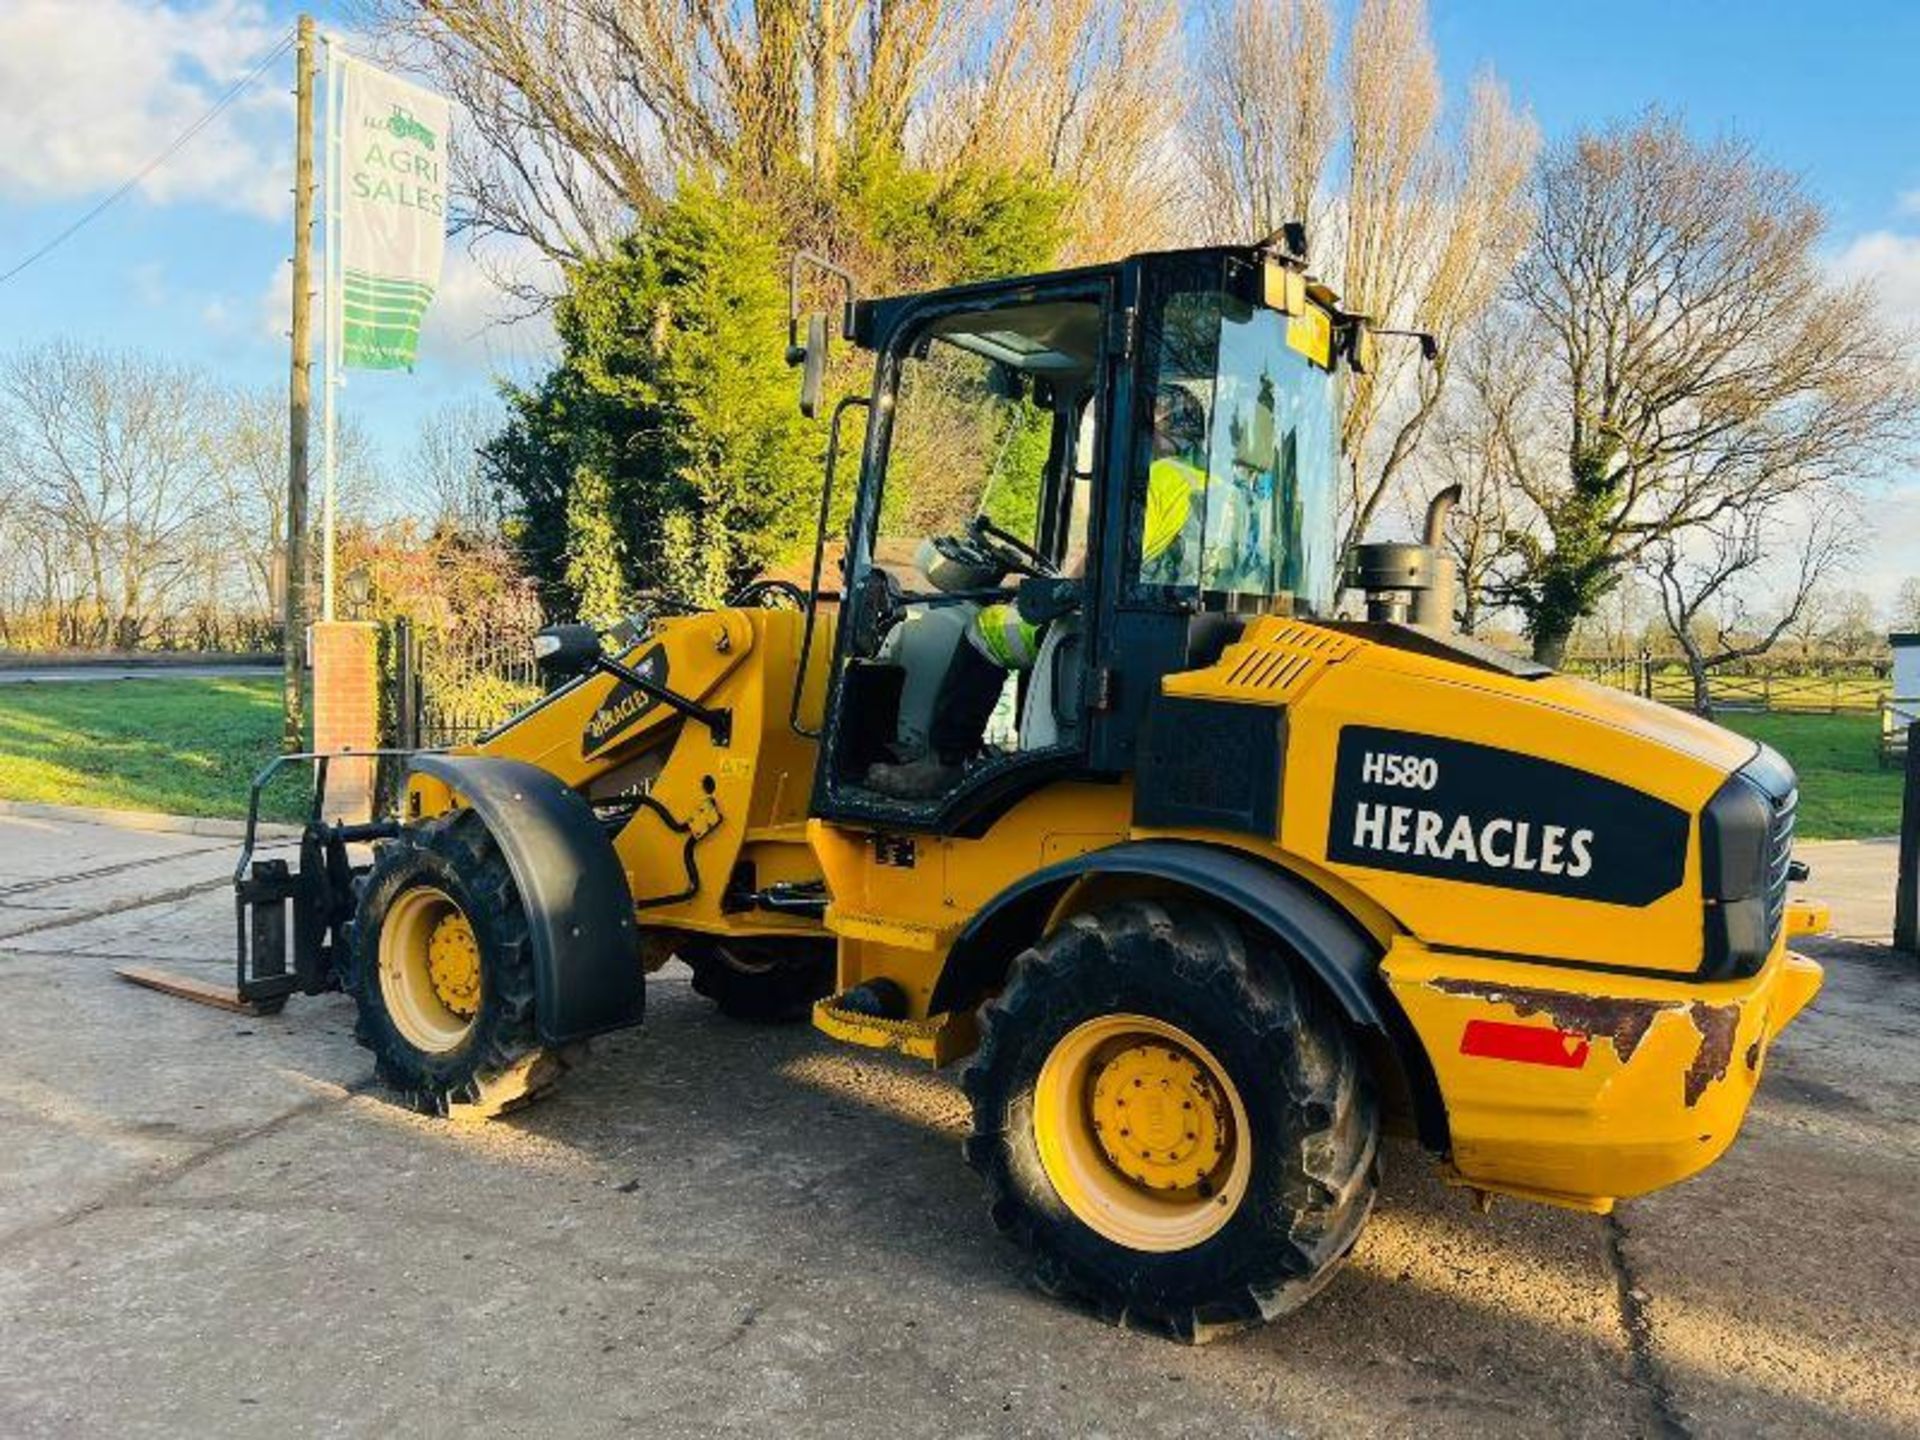 HERACLES H580 4WD TELEHANDLER * YEAR 2019 * C/W QUICK HITCH & PALLET TINES - Image 13 of 14